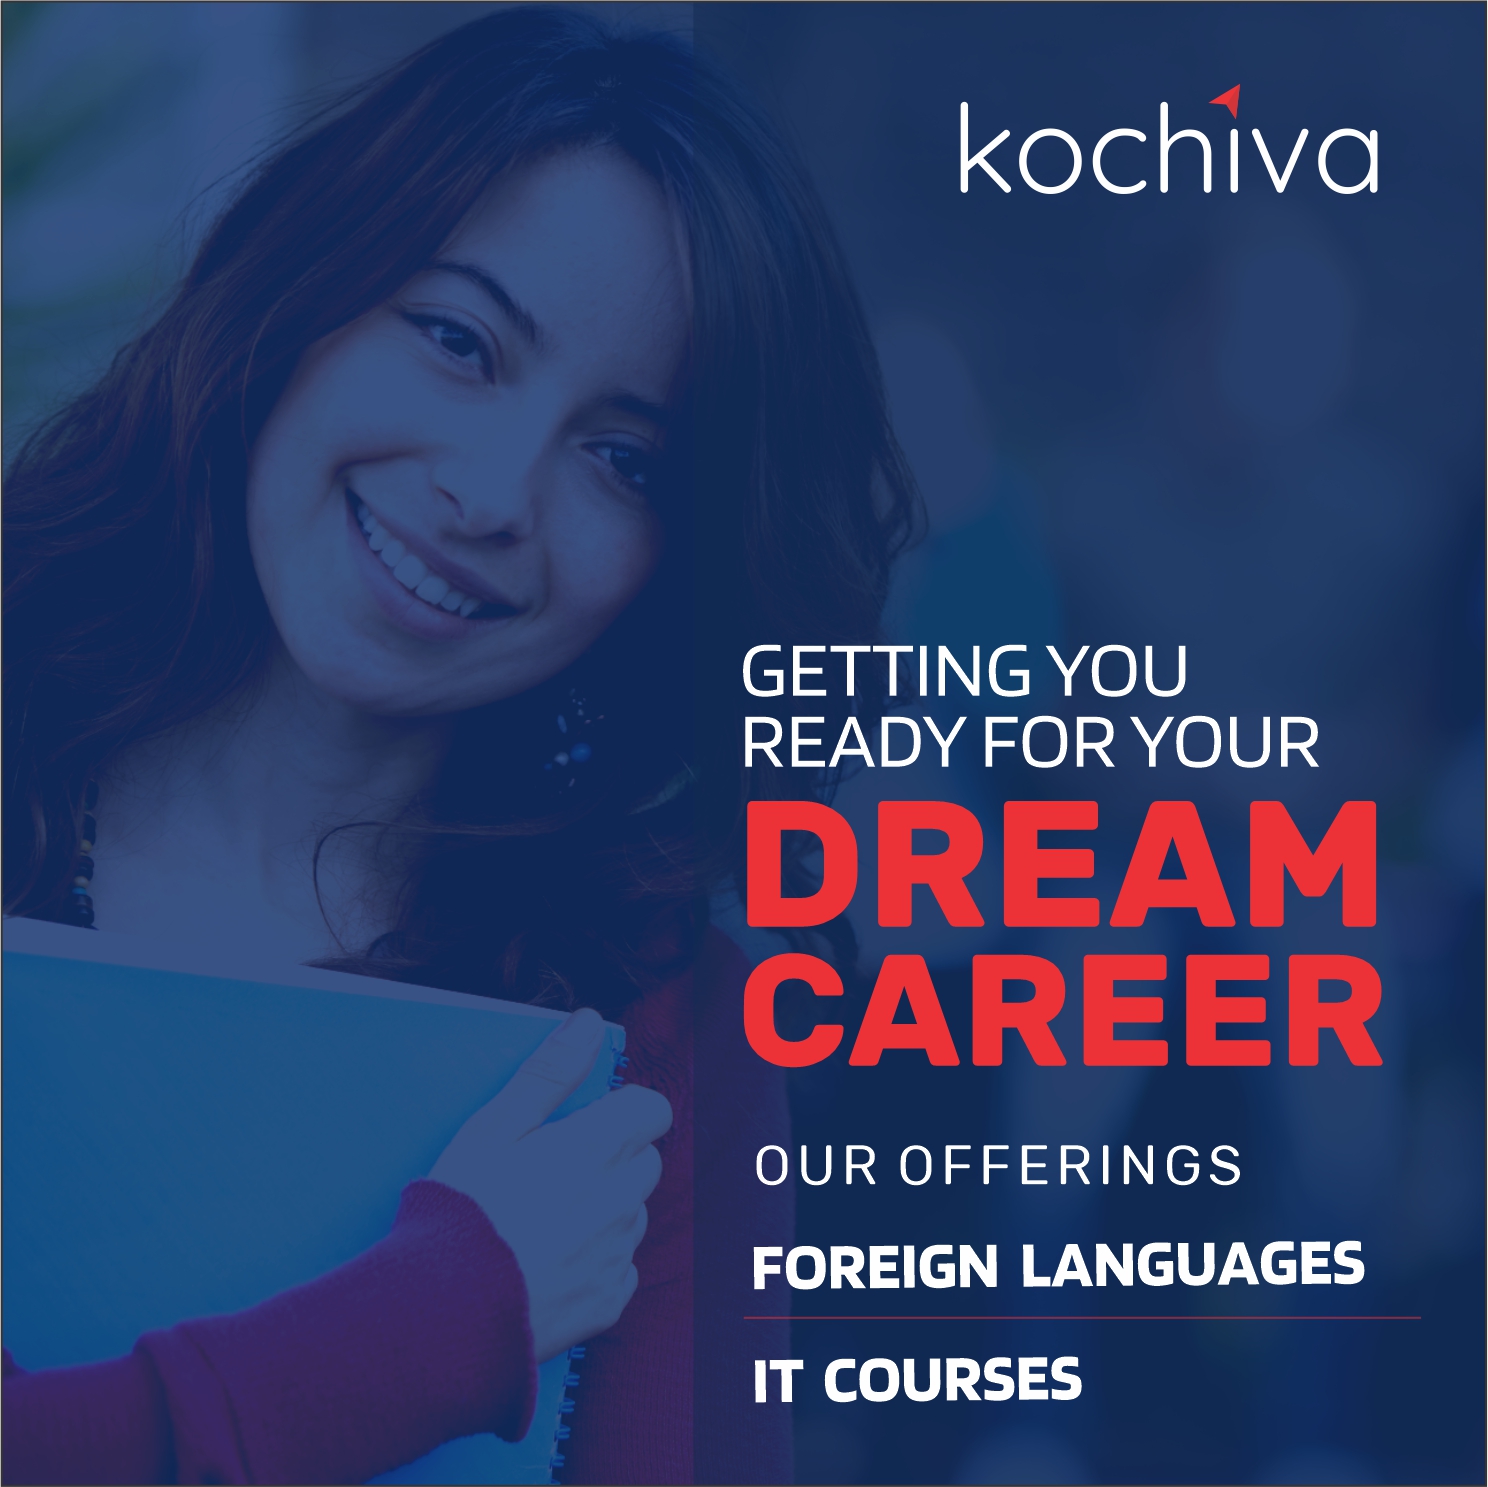 kochiva | foreign languages | german | french | it training | 100% placement assistance | educational services in kolkata